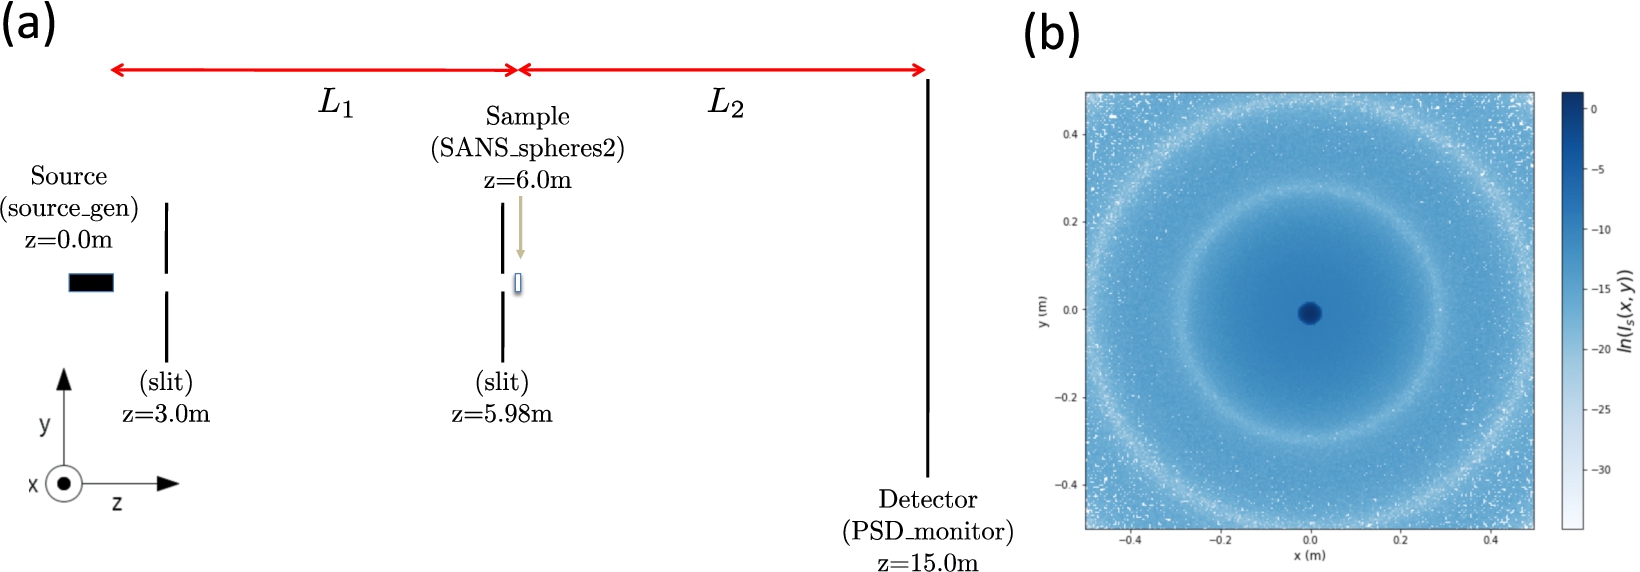 Shown in (a) is a schematic representation of the setup used in the simulation of the monochromatic SANS instrument, specifying all used McStas components in brackets and location (z) in metres. Drawing is not to scale. In (b) is the 2-D PSD_monitor component output, plotted in the 2D plane for all pixels, showing a clear ring pattern, as expected for scattering from isotropic monodisperse spheres.